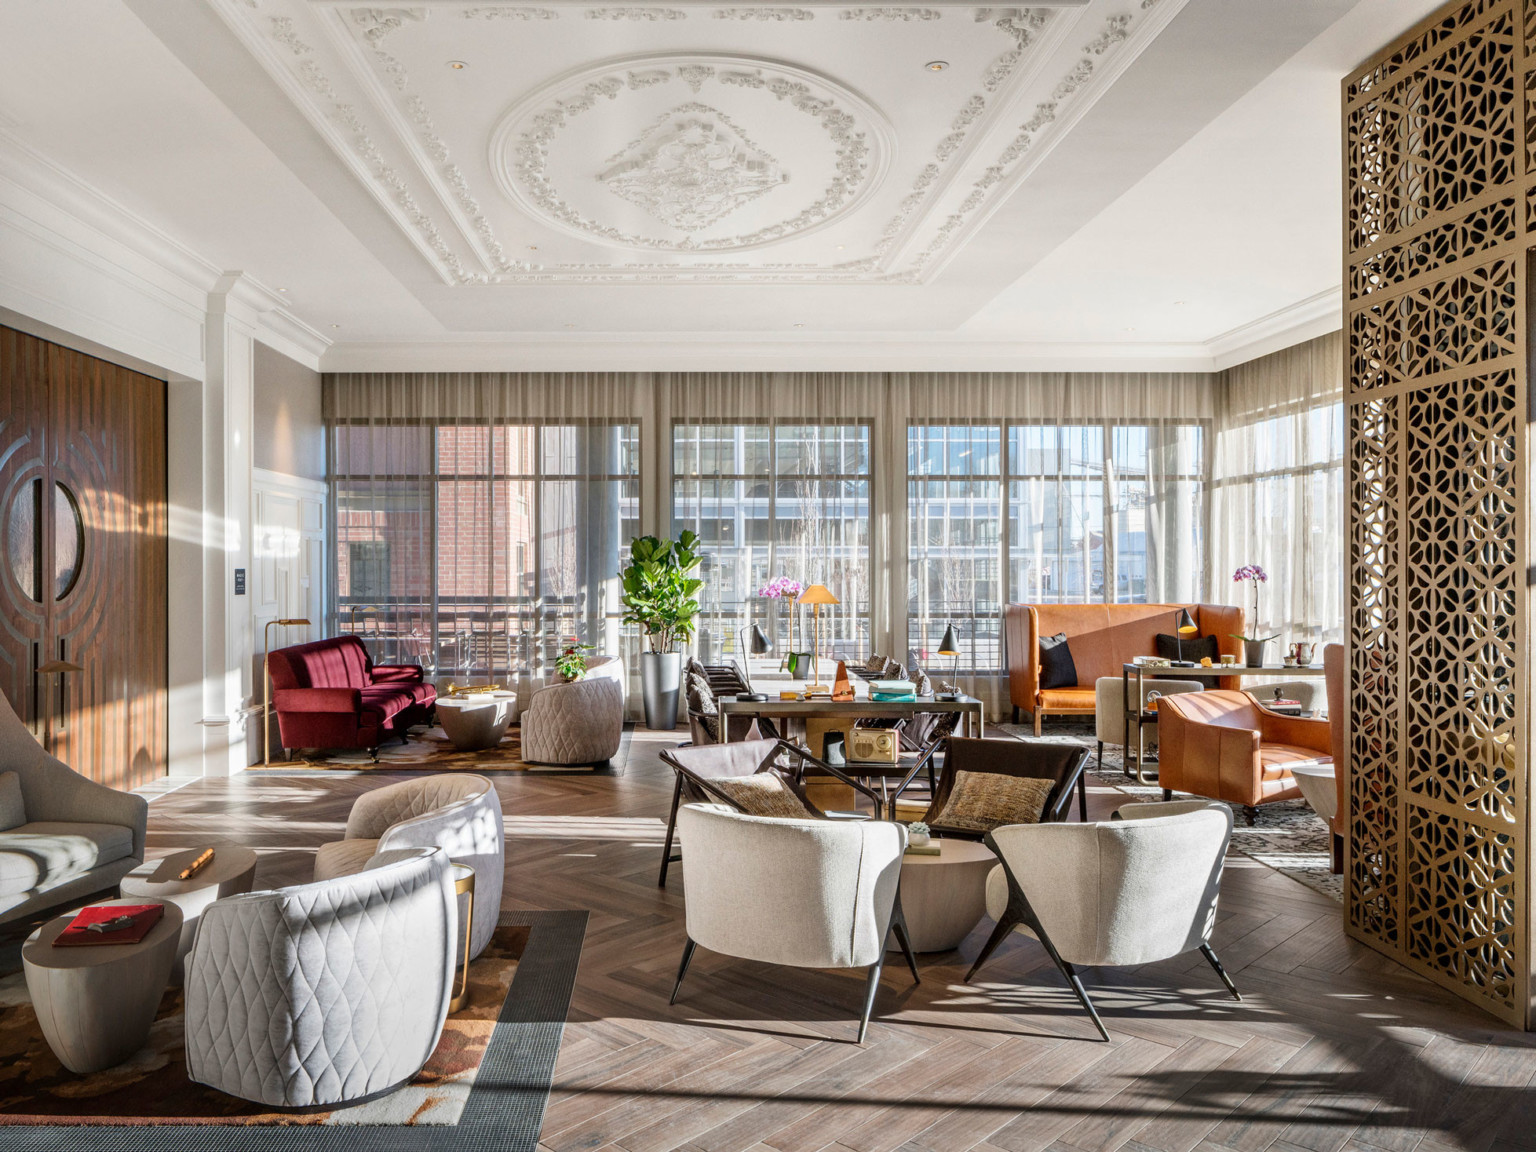 The Elizabeth Hotel, Autograph Collection lobby with white and orange seating, floor to ceiling windows, and crown molding